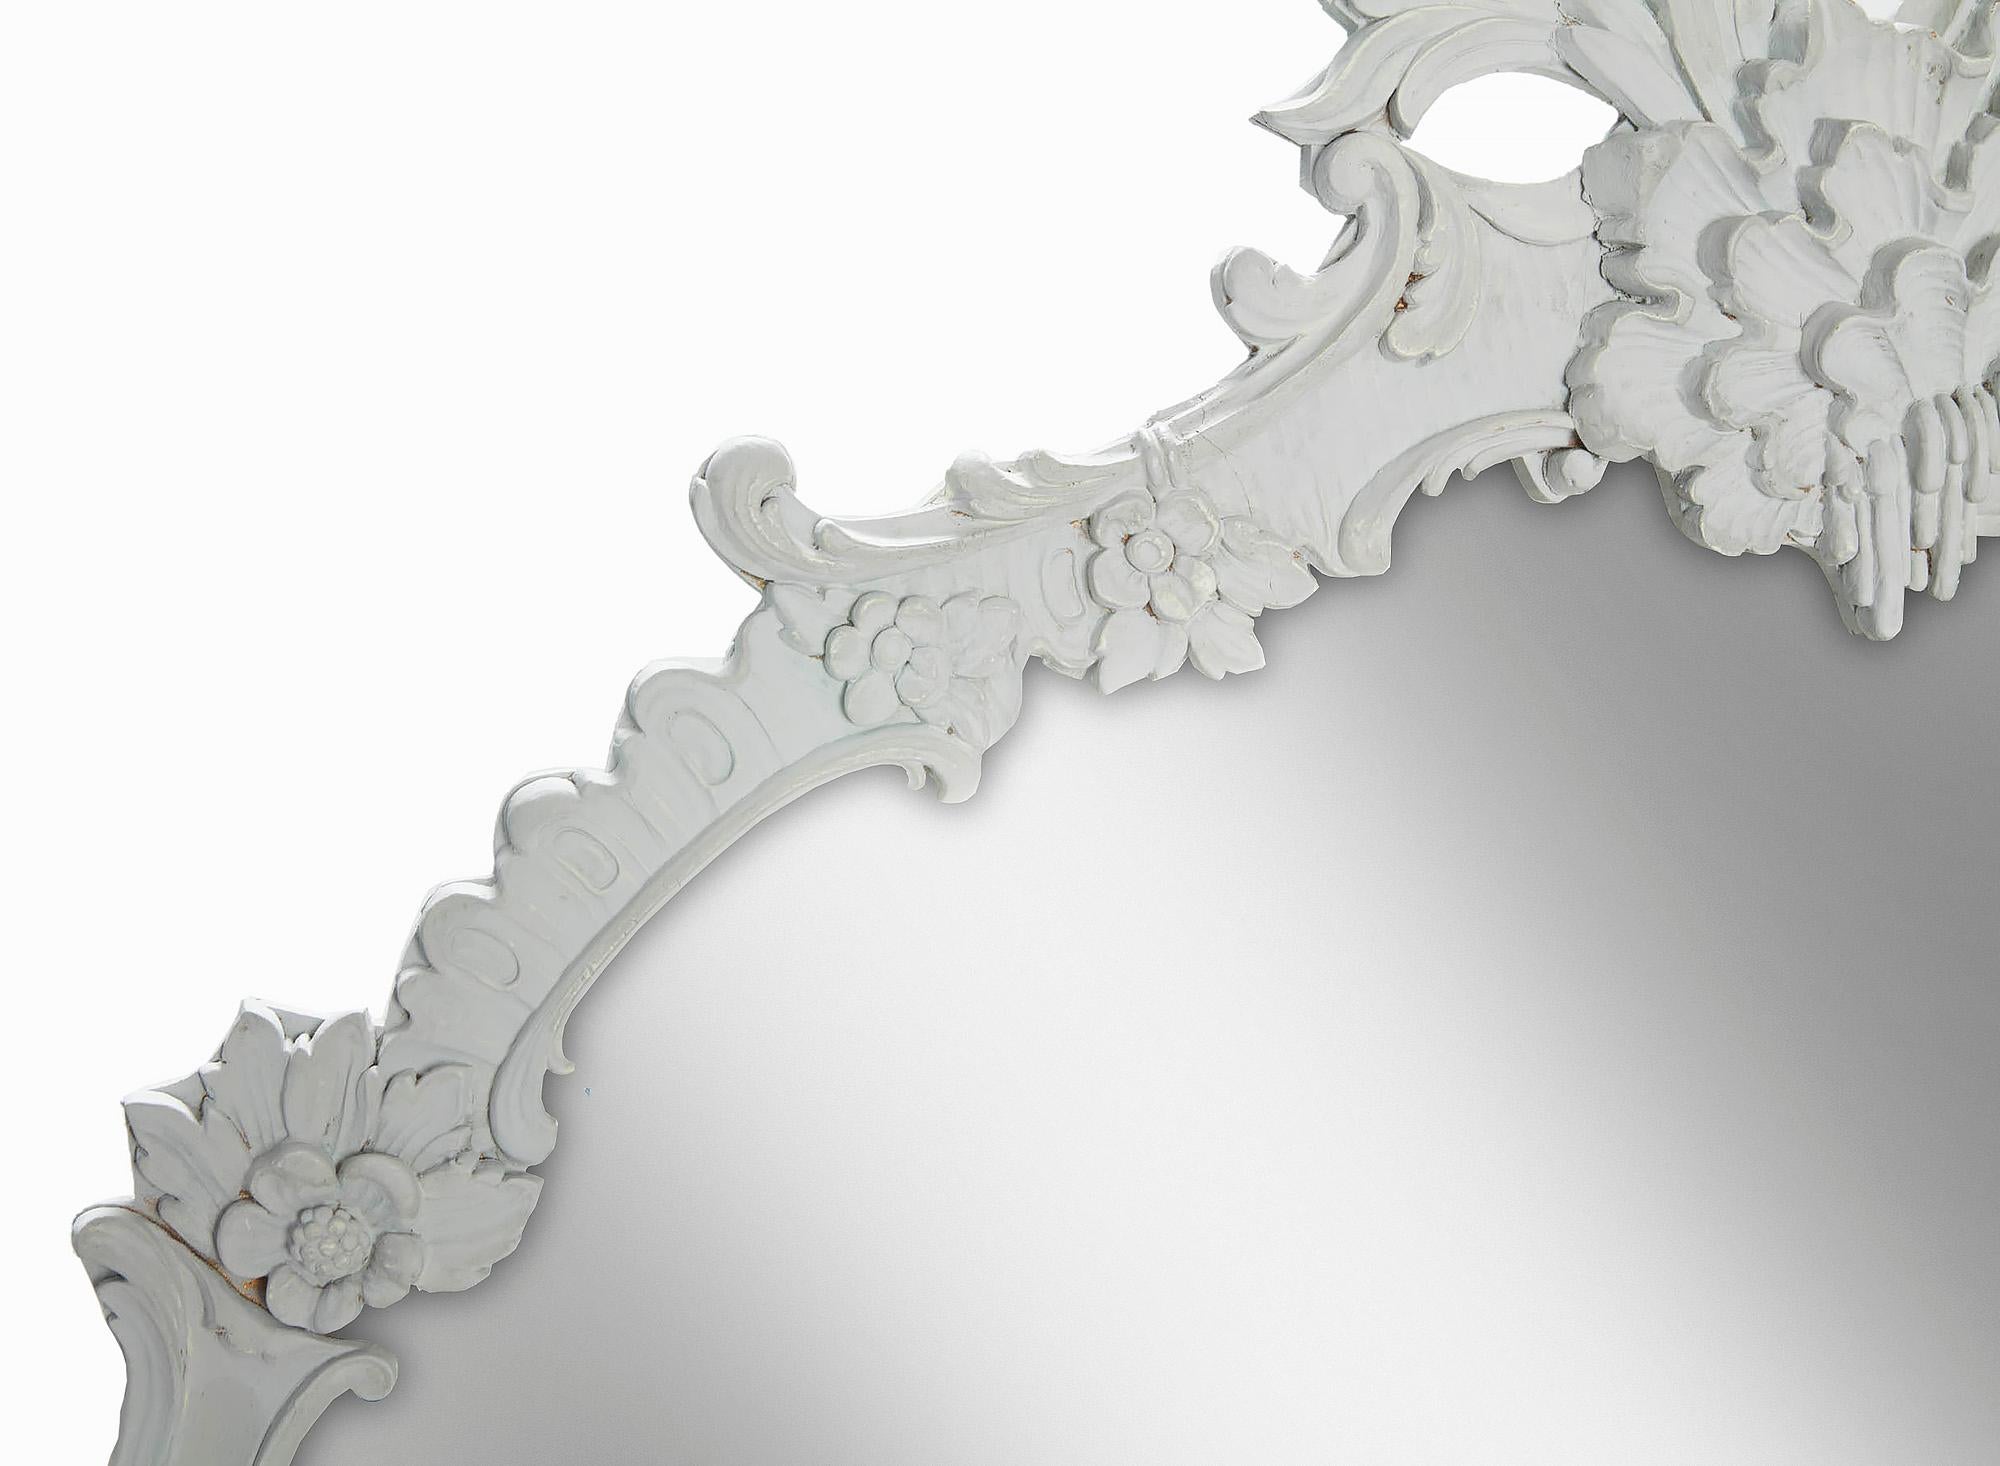 Rococo Revival Late 20th Century Large Round Mirror with Flourishes, Crests & Floral Accents